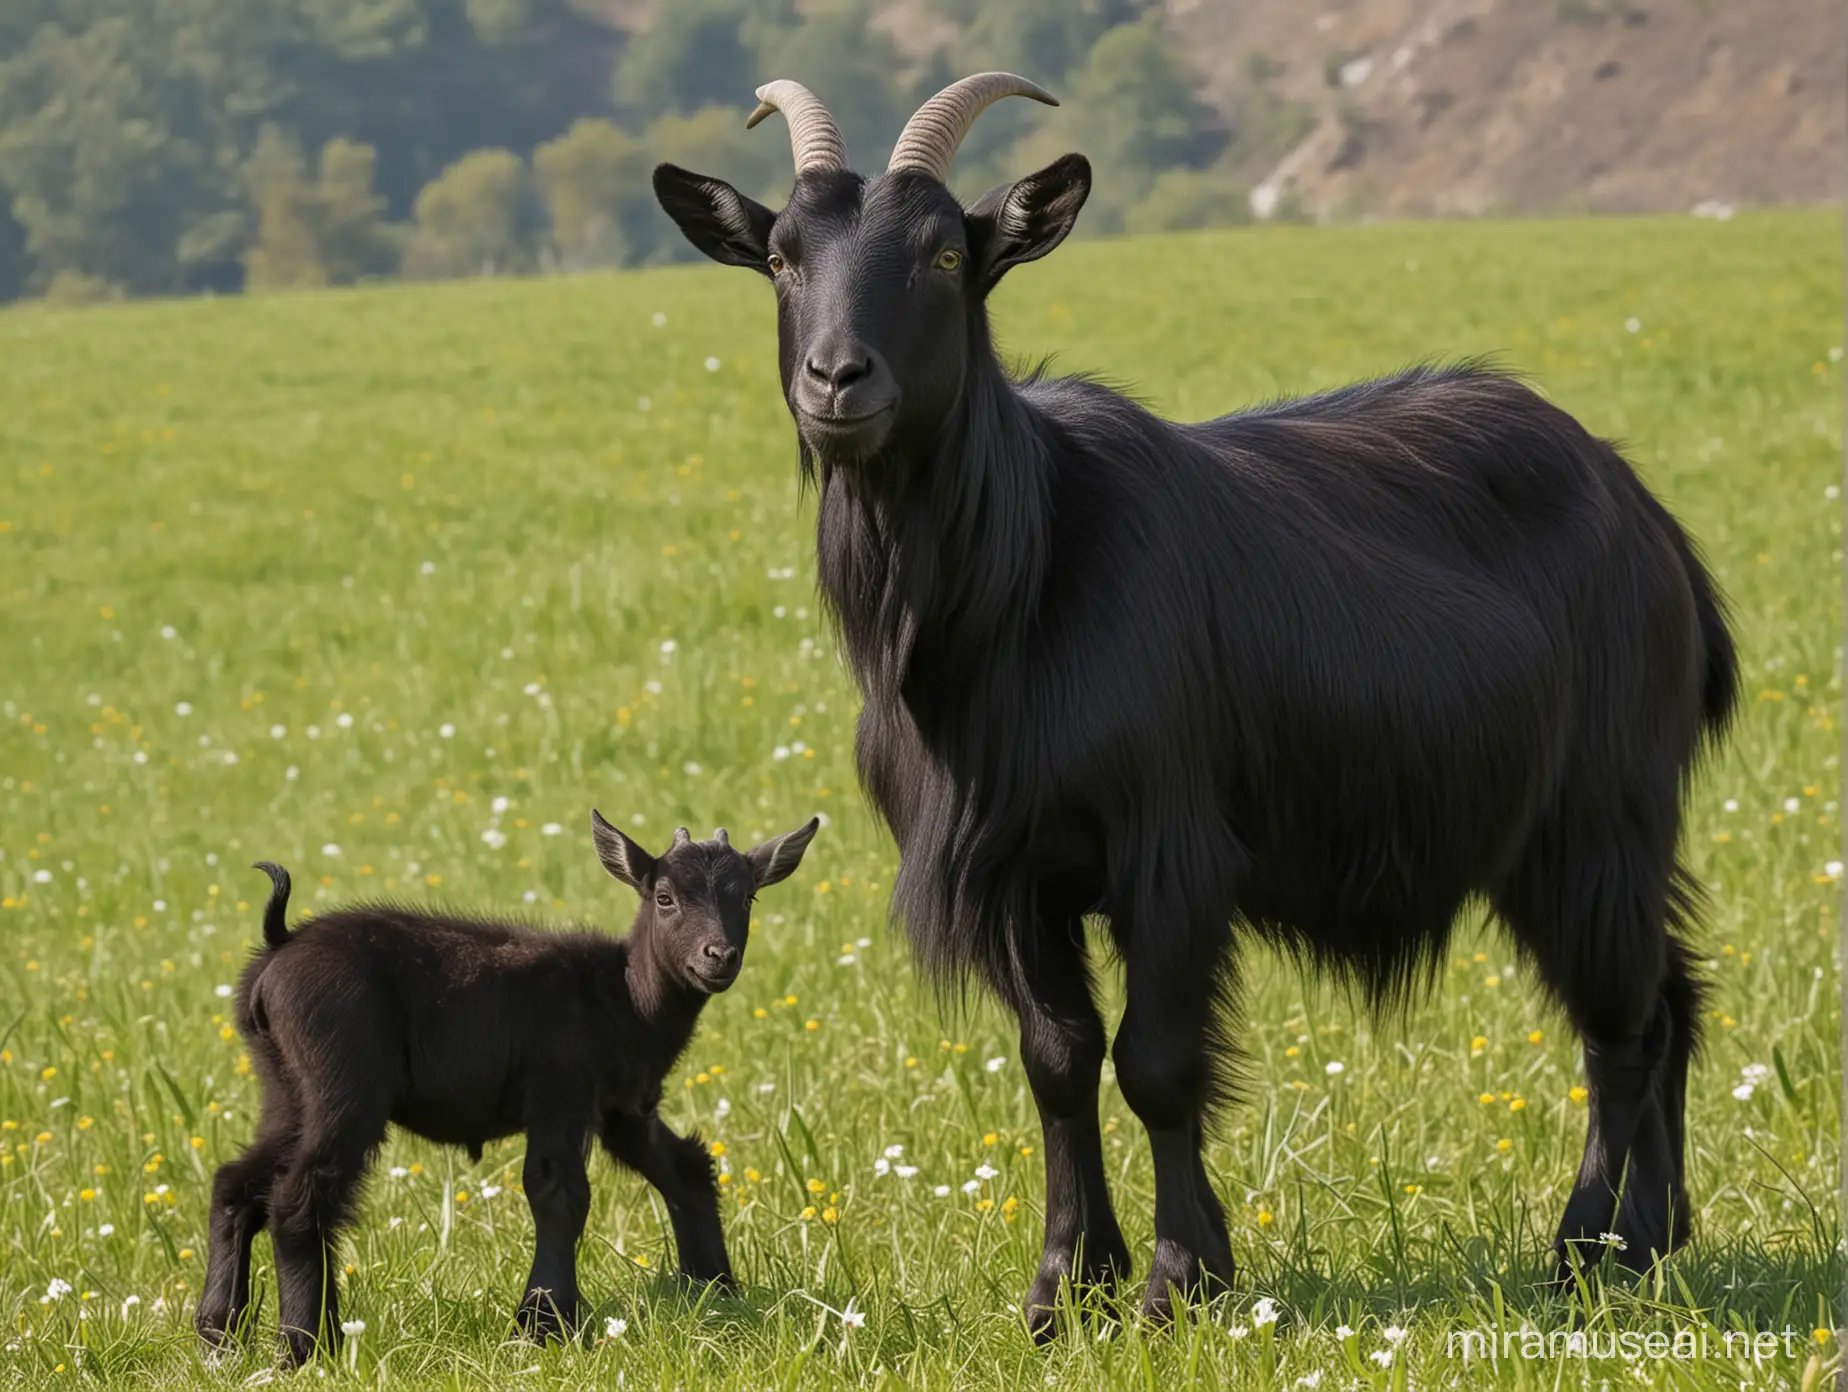 black mother goat with baby in the fields
